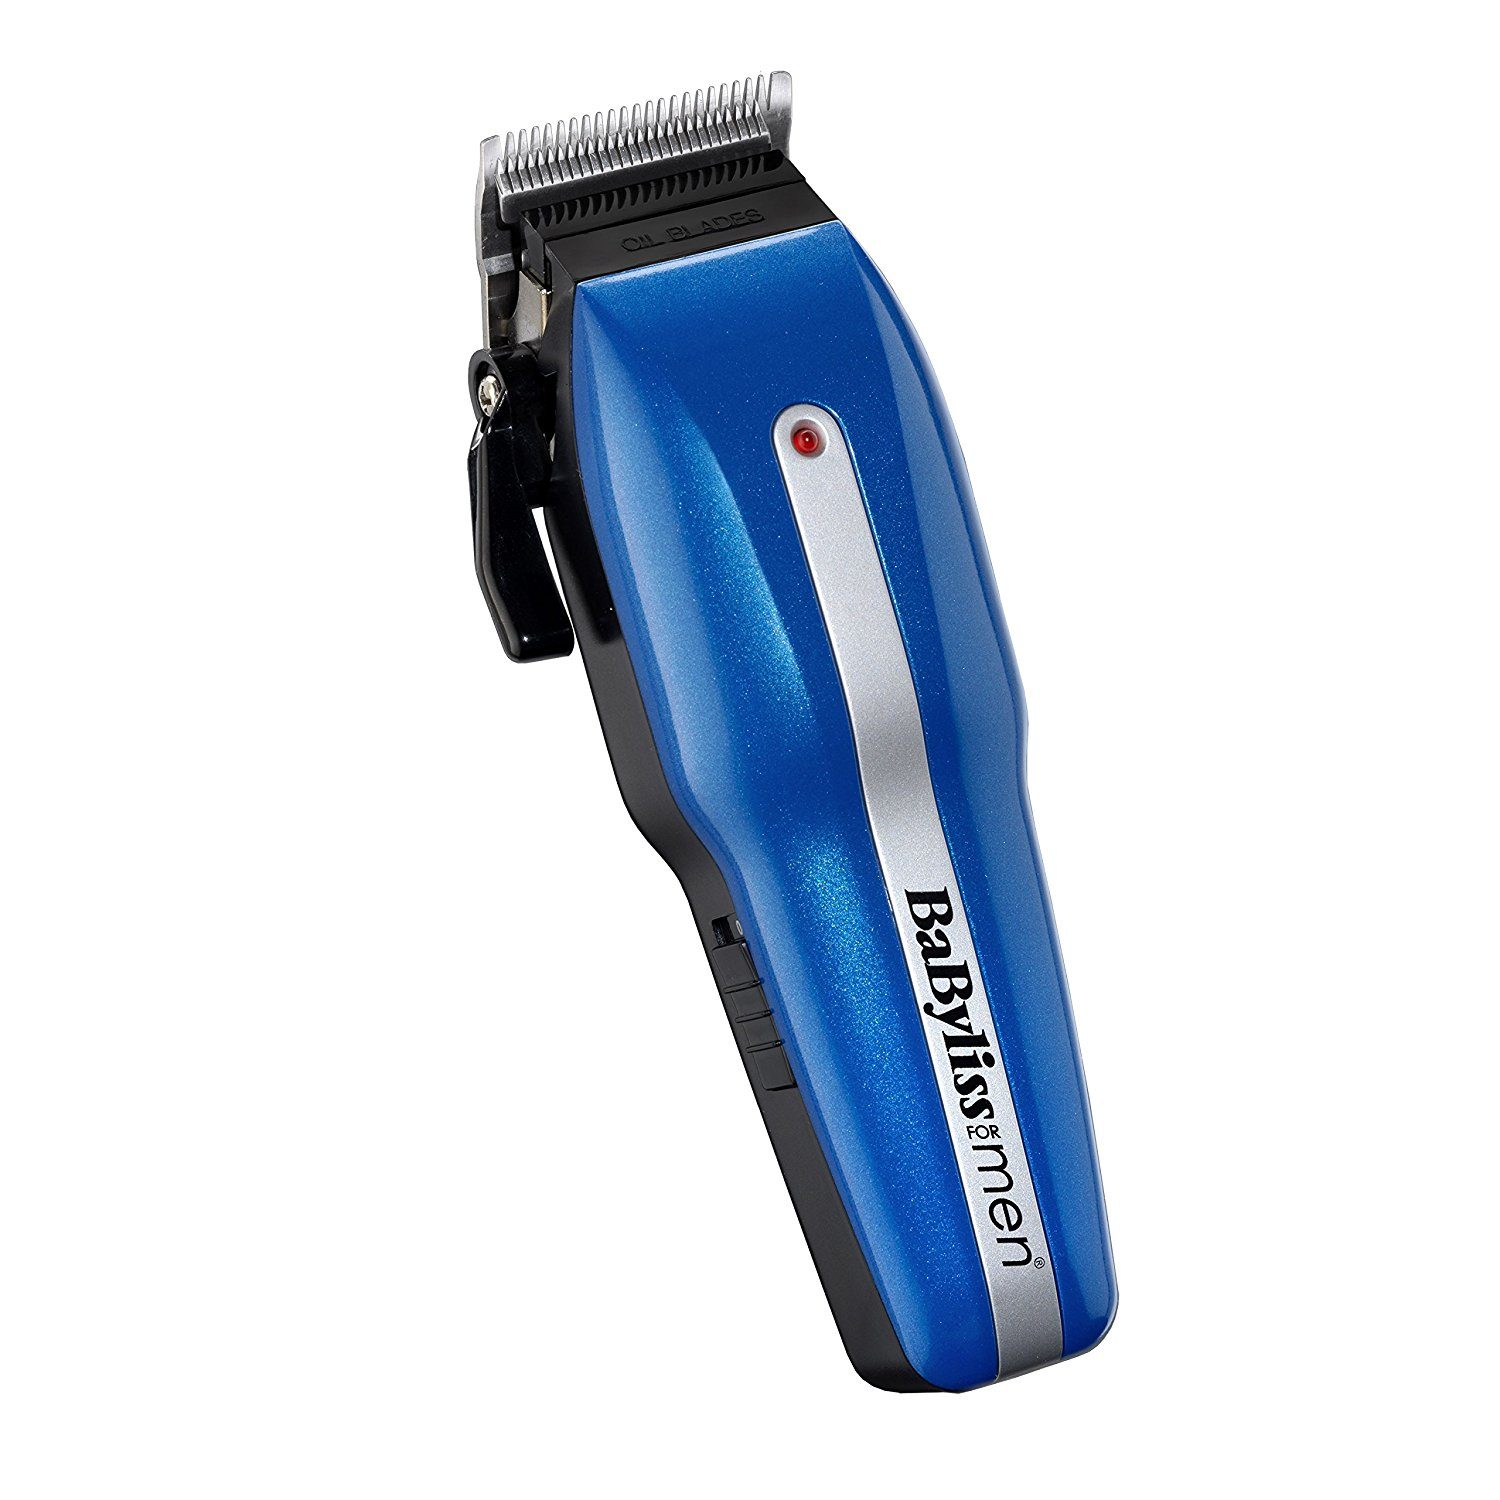 number four rated babyliss hair clippers